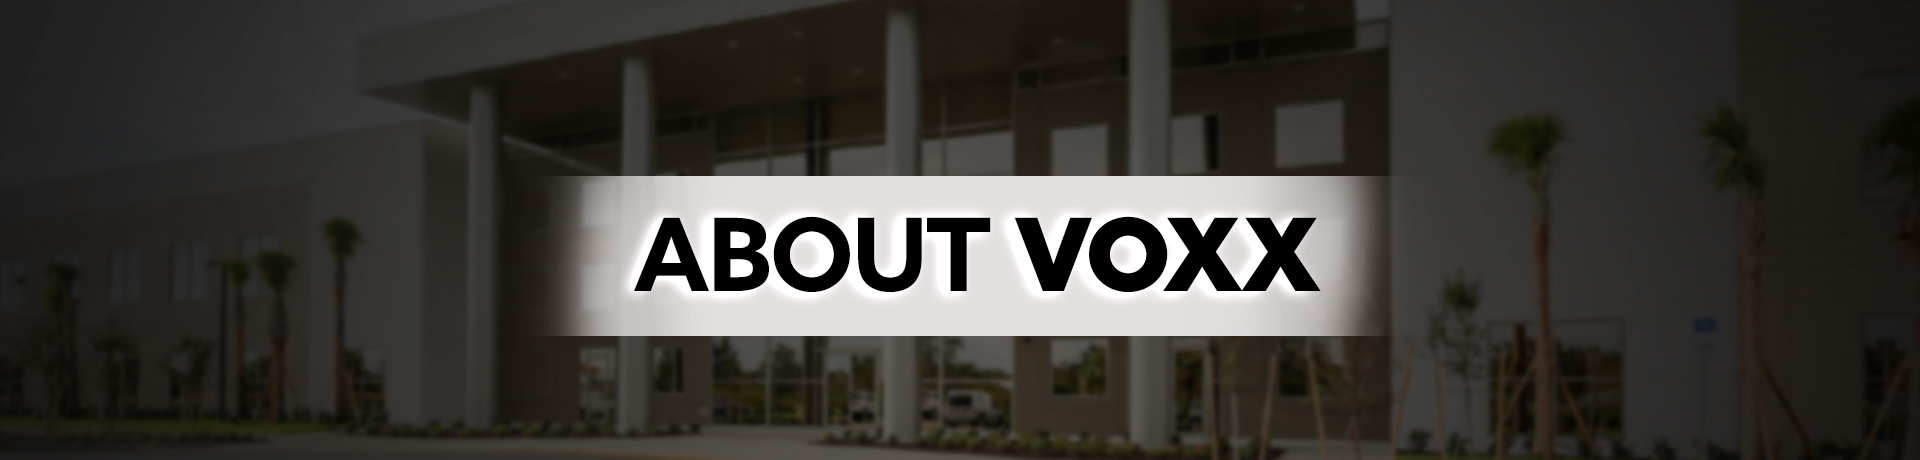 About VOXX